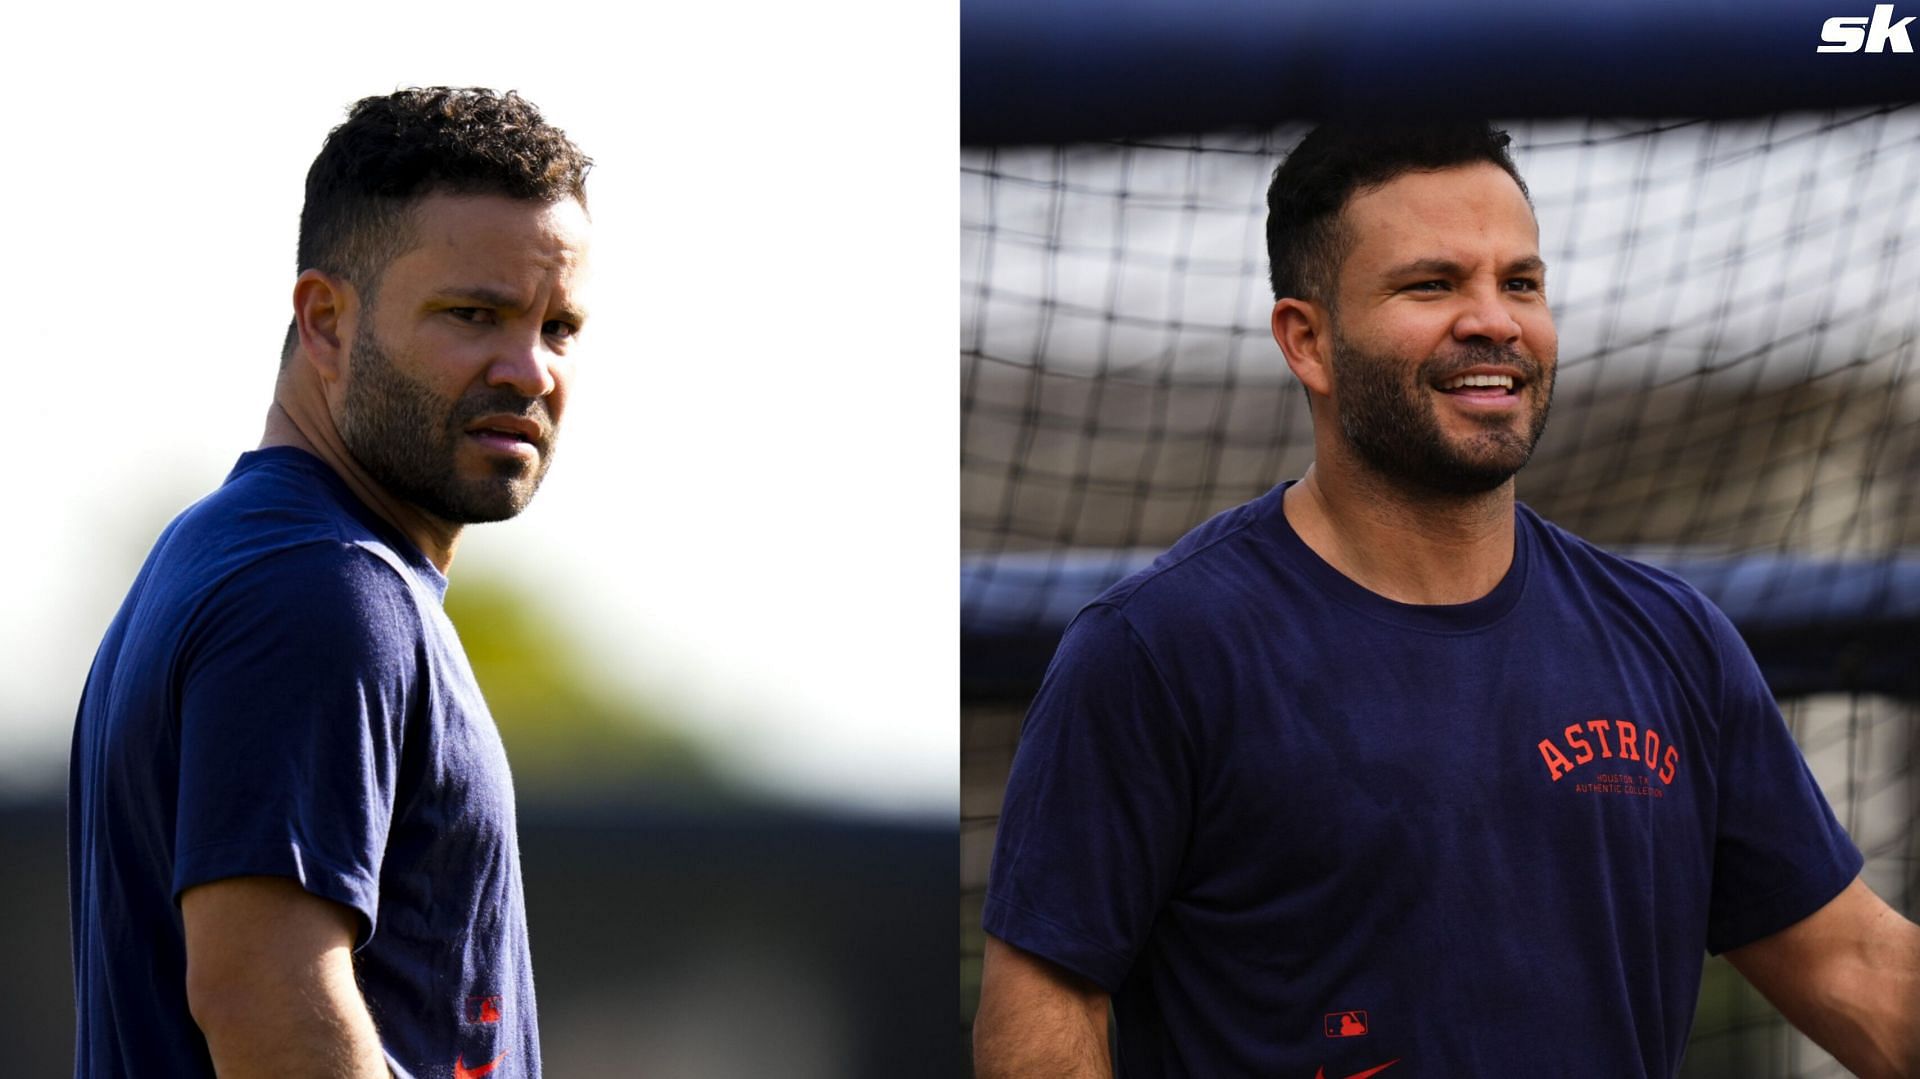  Astros star Jose Altuve gifts game-worn shoes to devoted fan at Spring Training